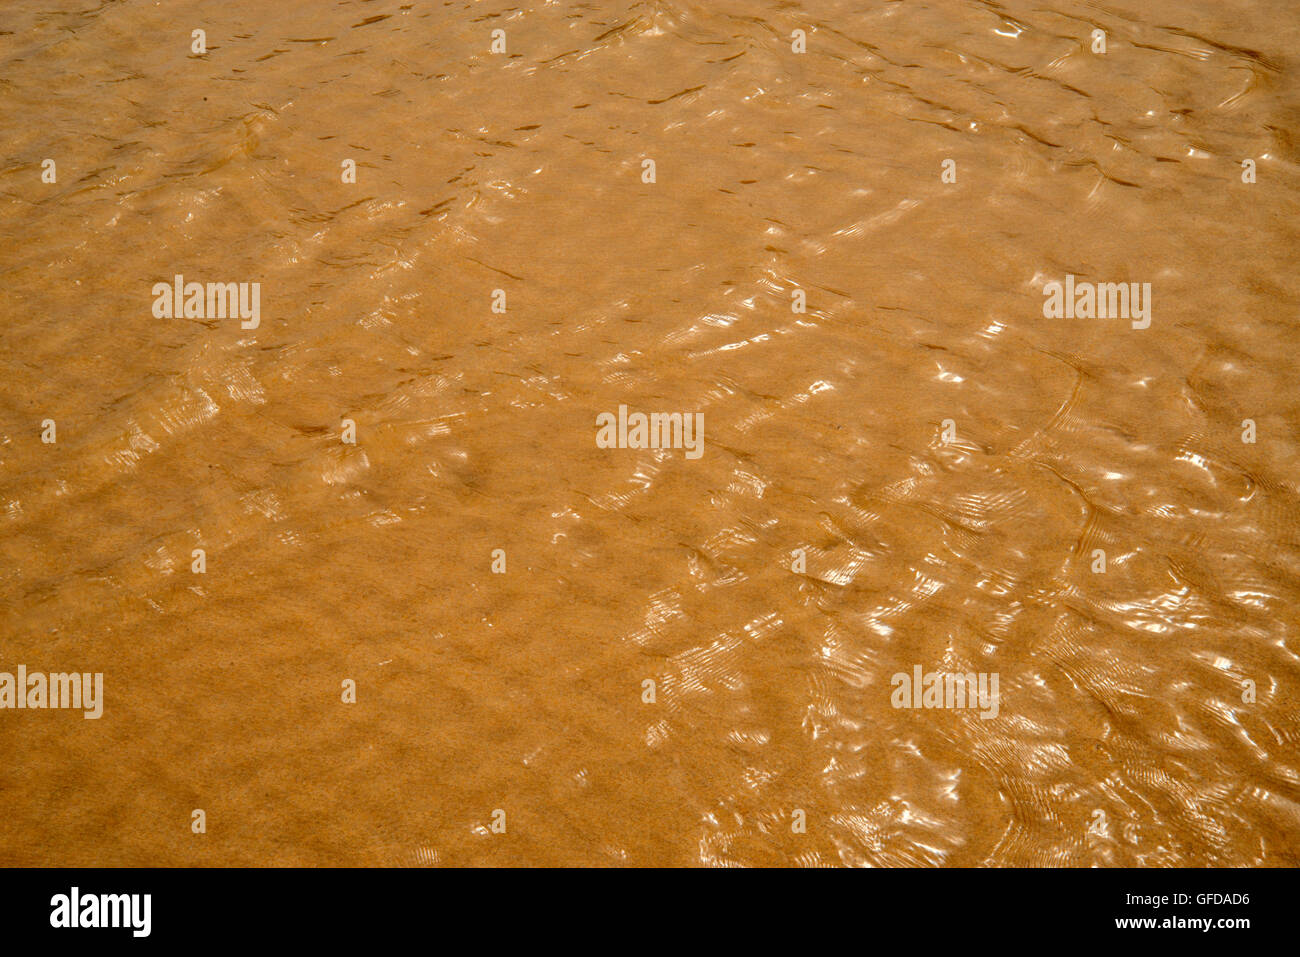 Ripples on sand viewed through the water. Stock Photo